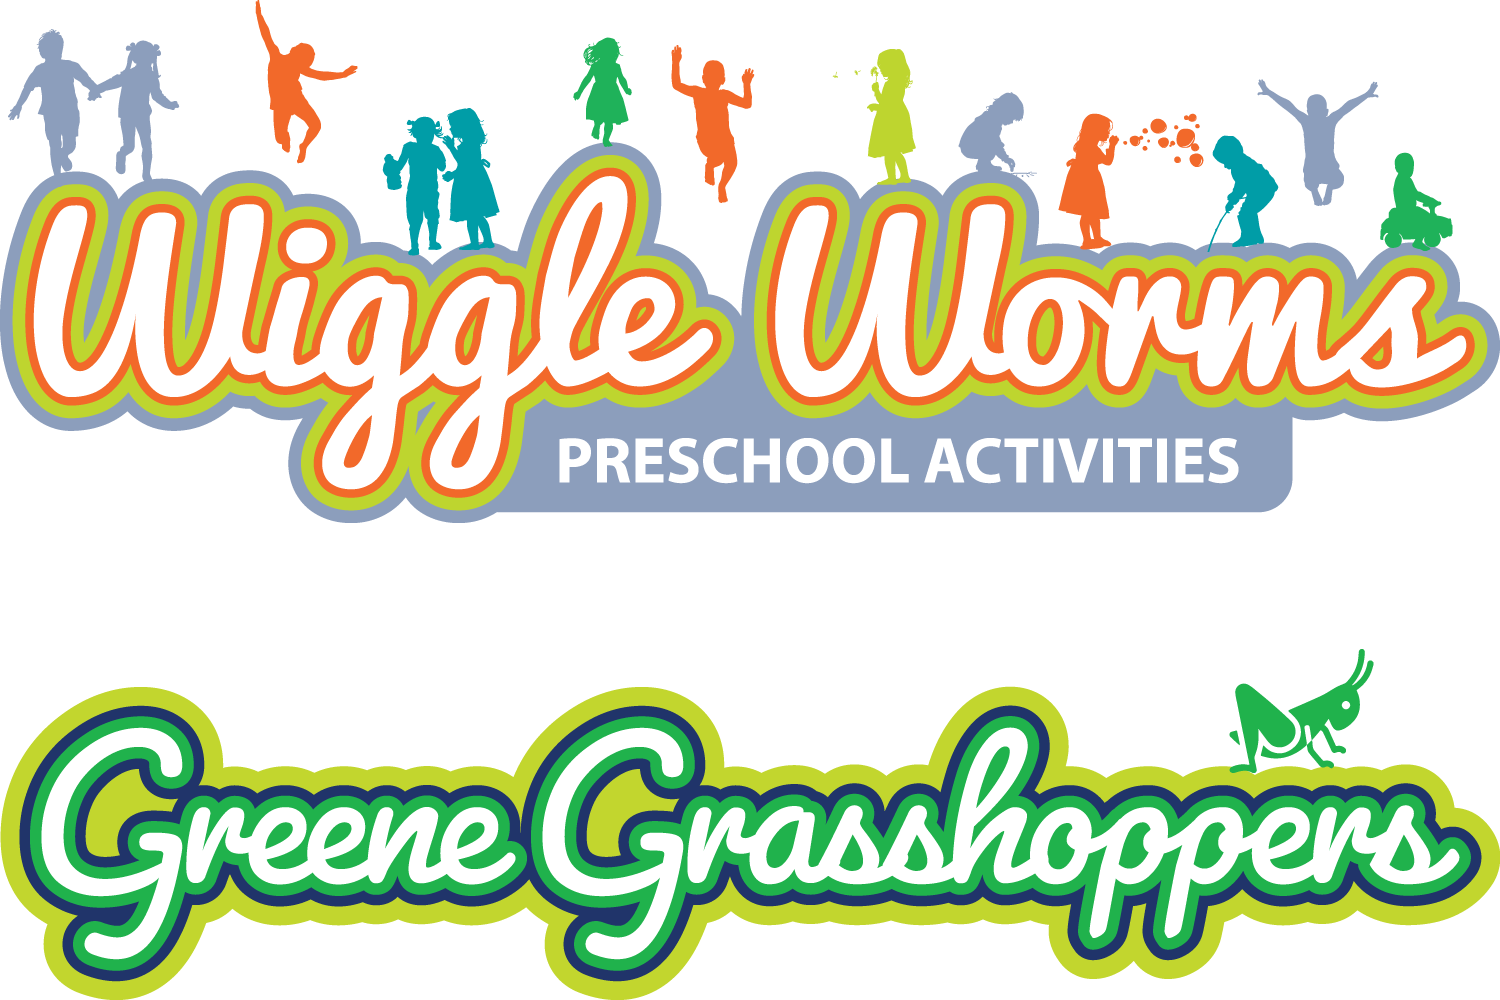 Wiggle Worms and Green Grasshoppers logos